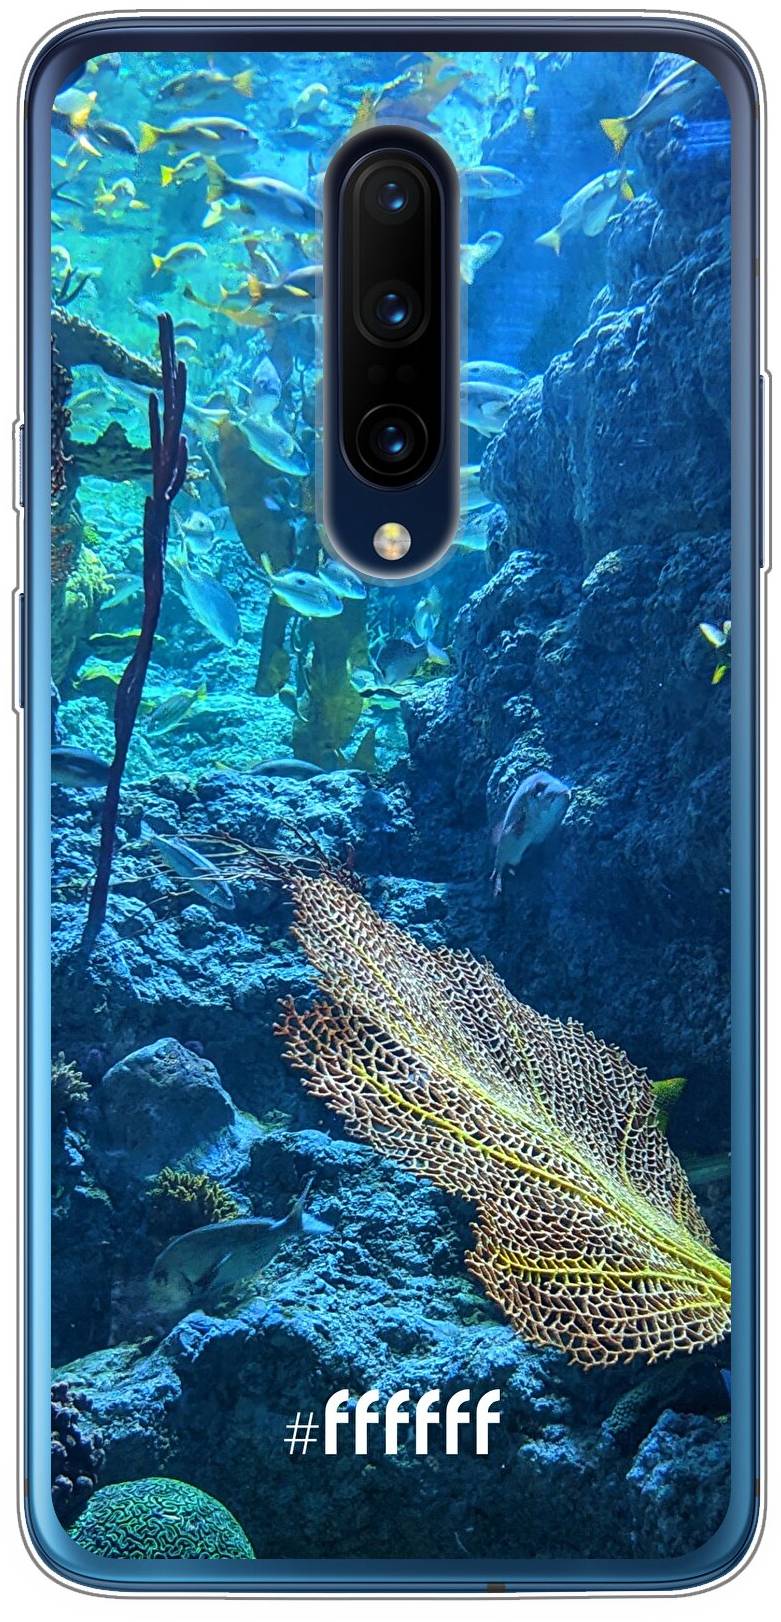 Coral Reef 7 Pro